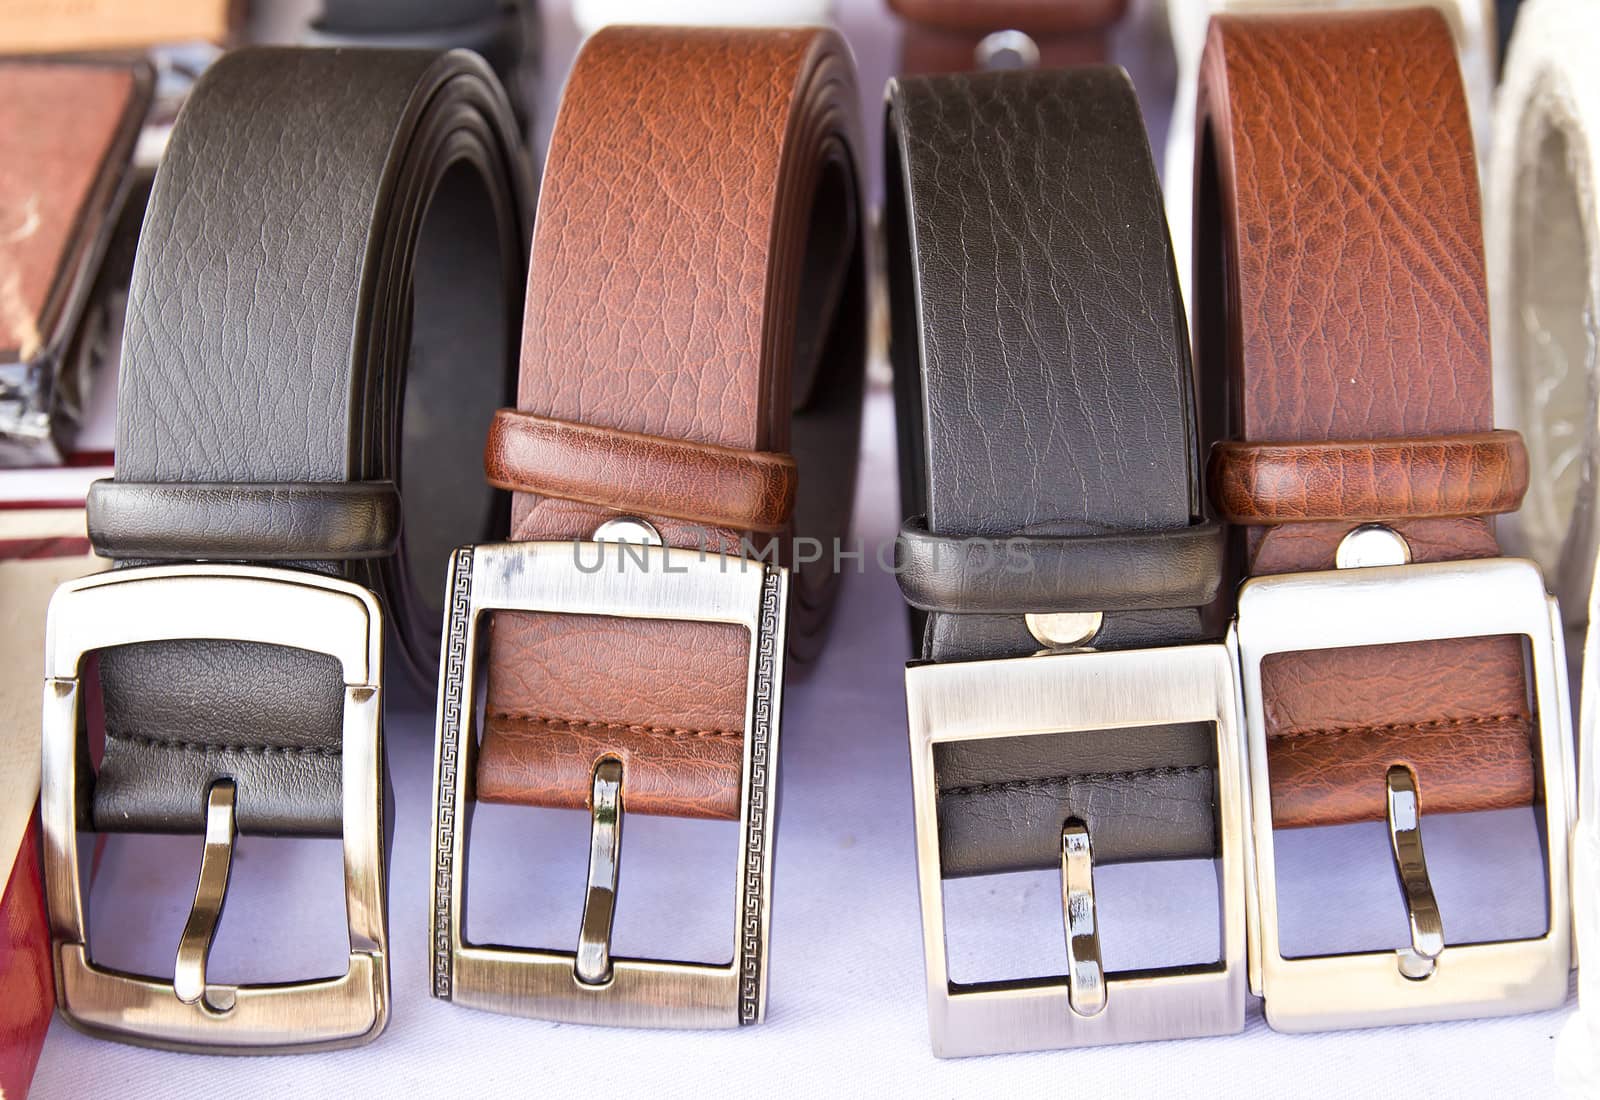 Closeup four leather belts on the table